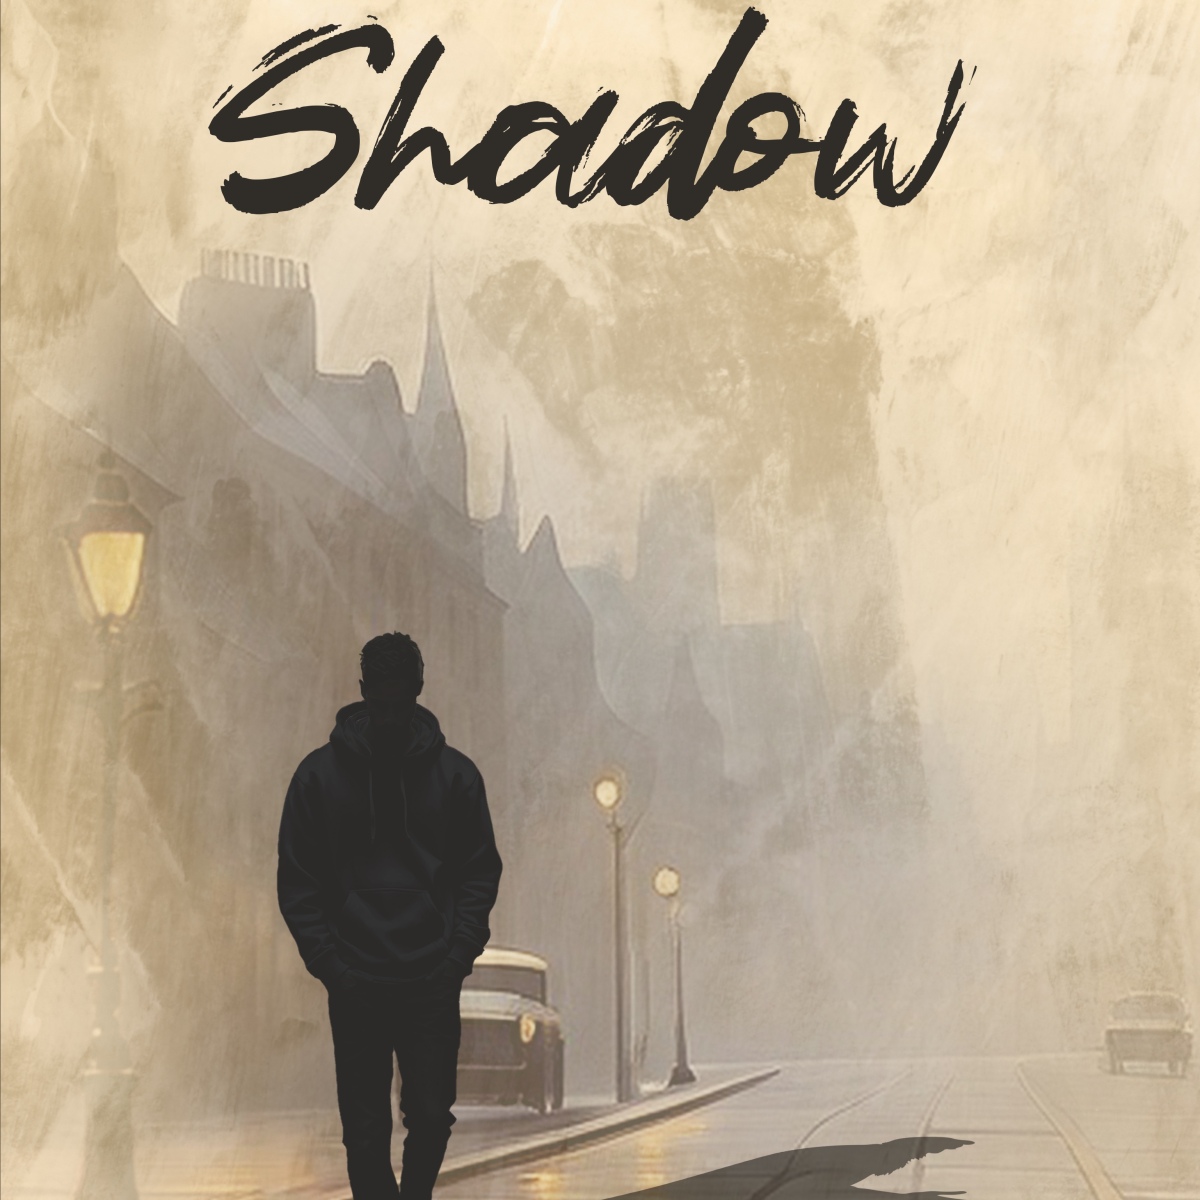 Yesterday’s Shadow launches today!